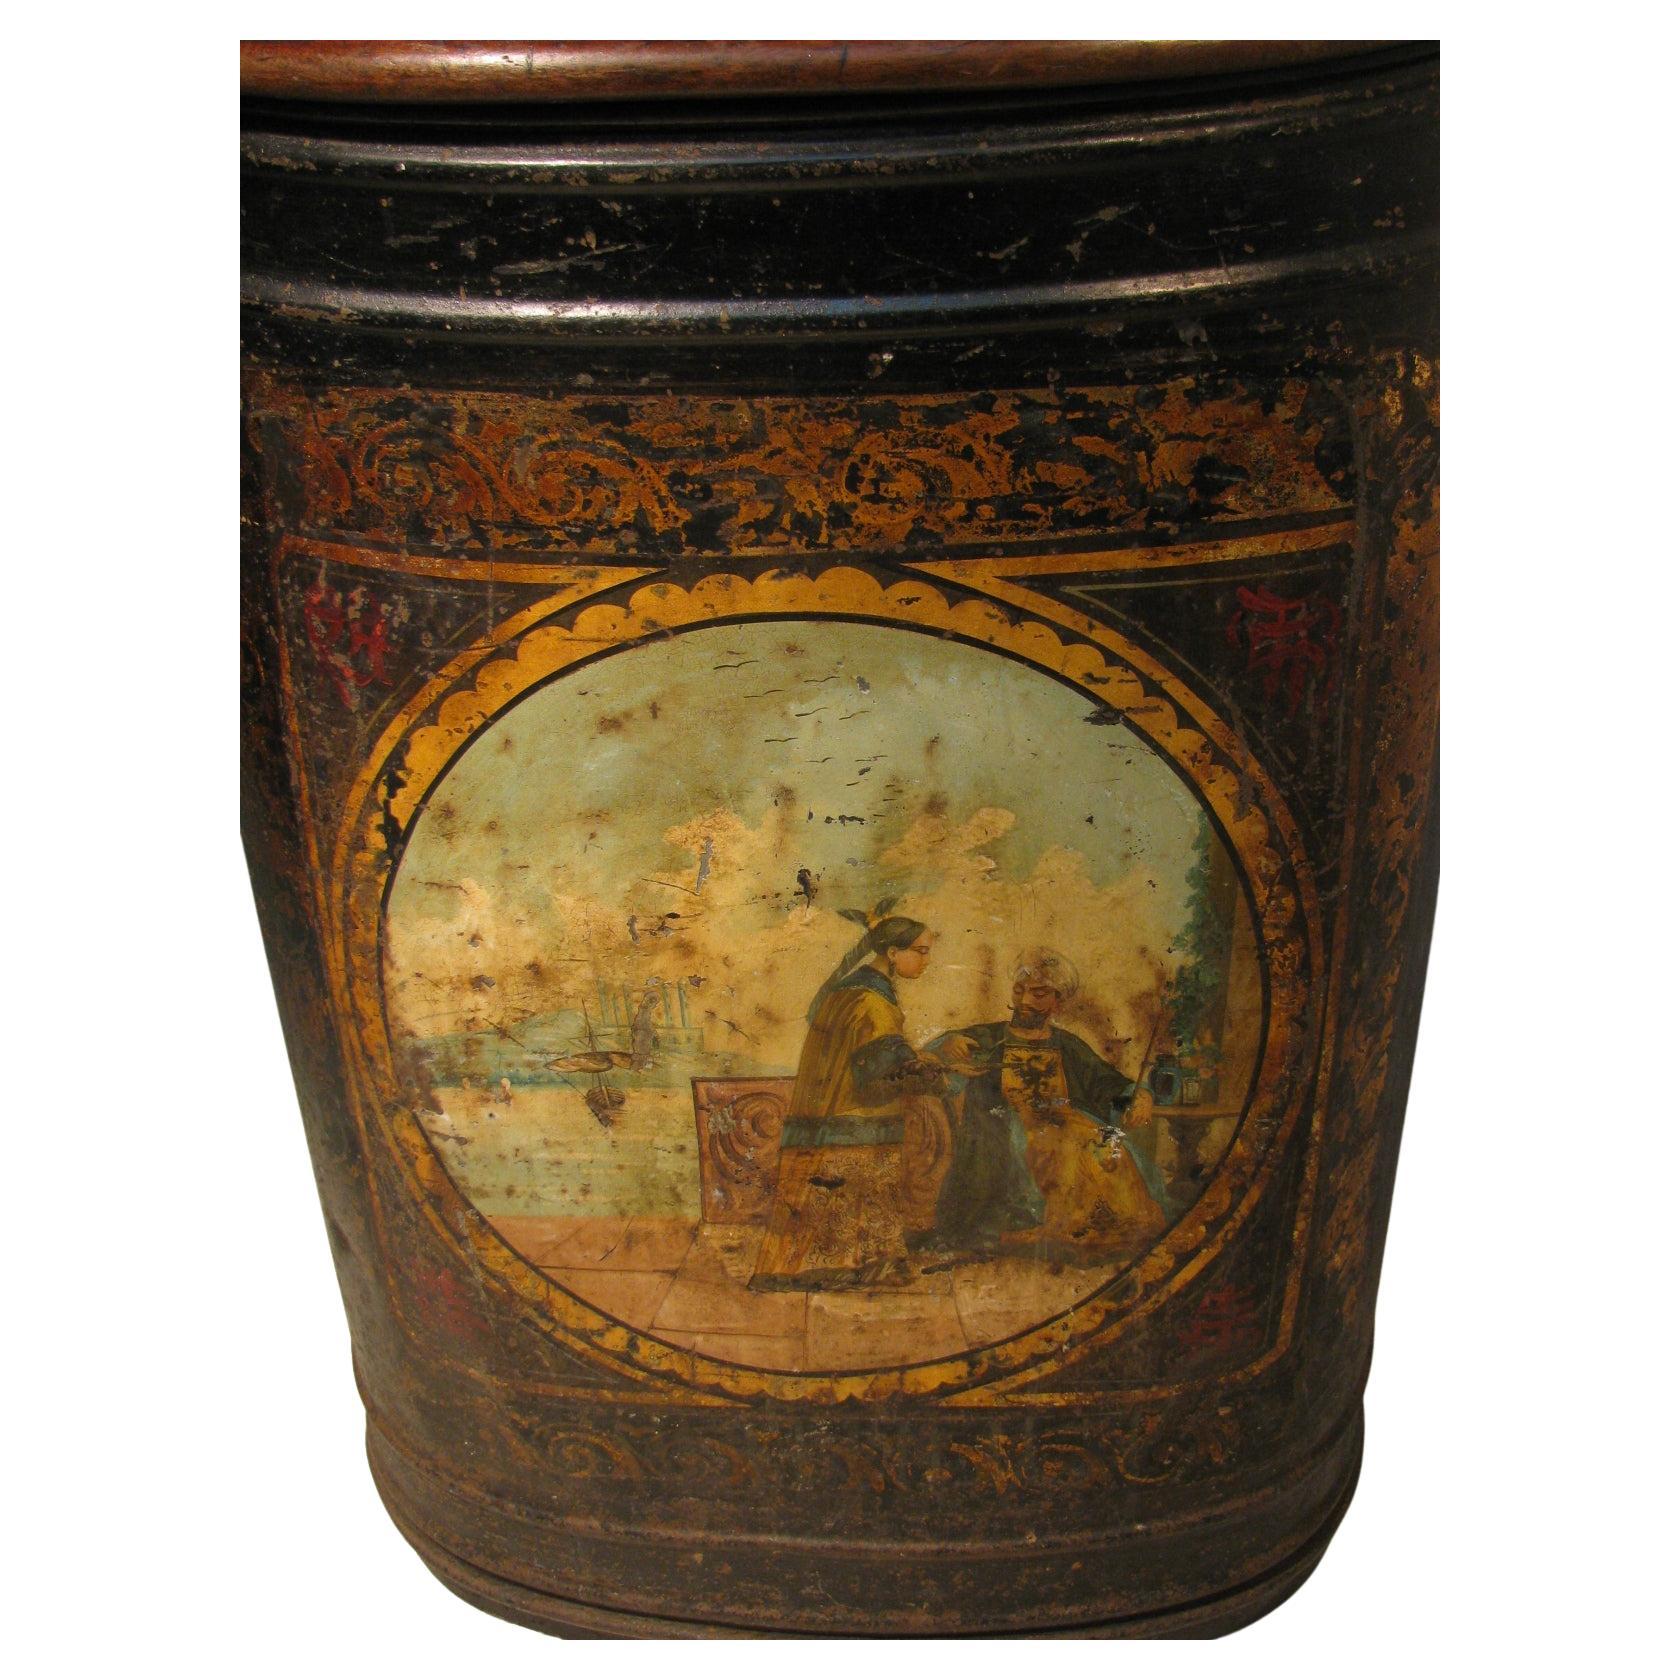 Fabulous and large store tea tin by Parnall & Sons who were the people to see for outfitting your store and much more as the company grew from 1830. Hand painted showing a girl serving a prince some tea alongside the harbor. Wooden top is mahogany